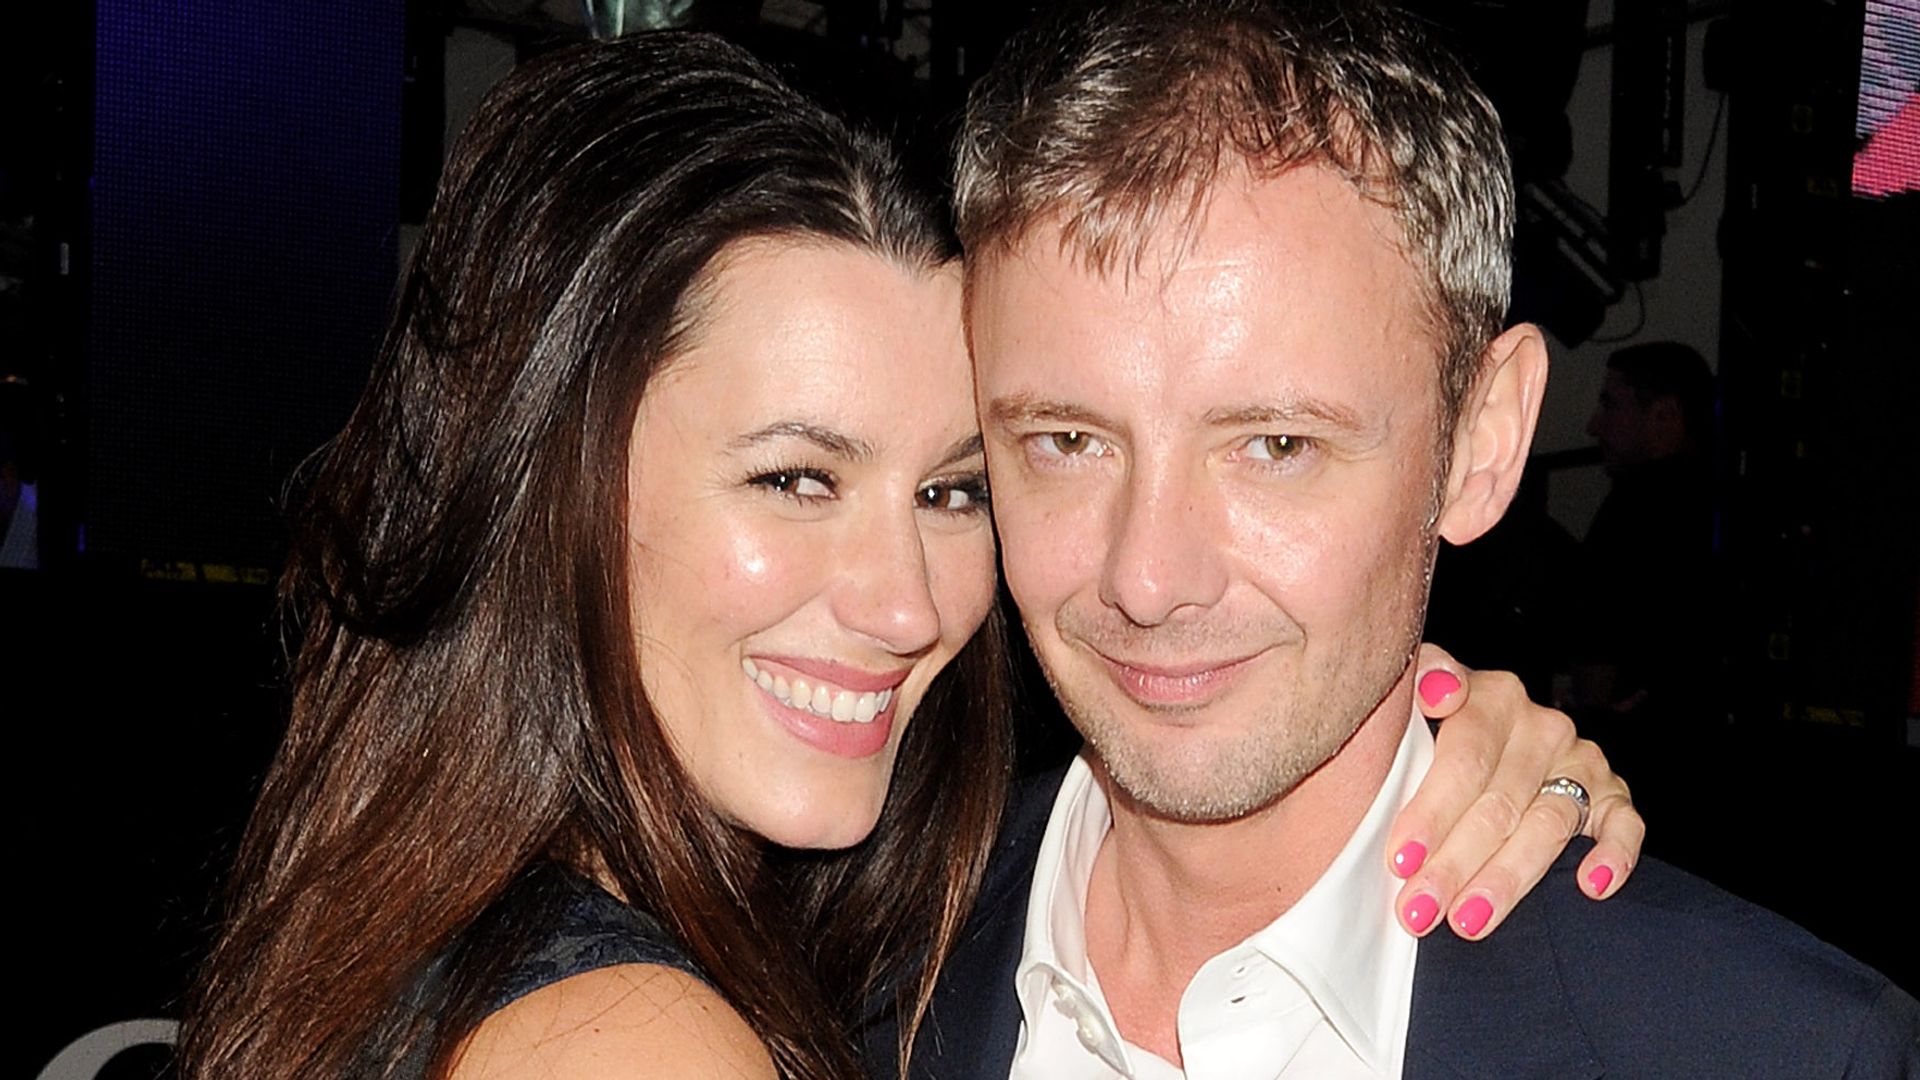 John Simm in a blue suit and white shirt hugging his wife Kate in a dress